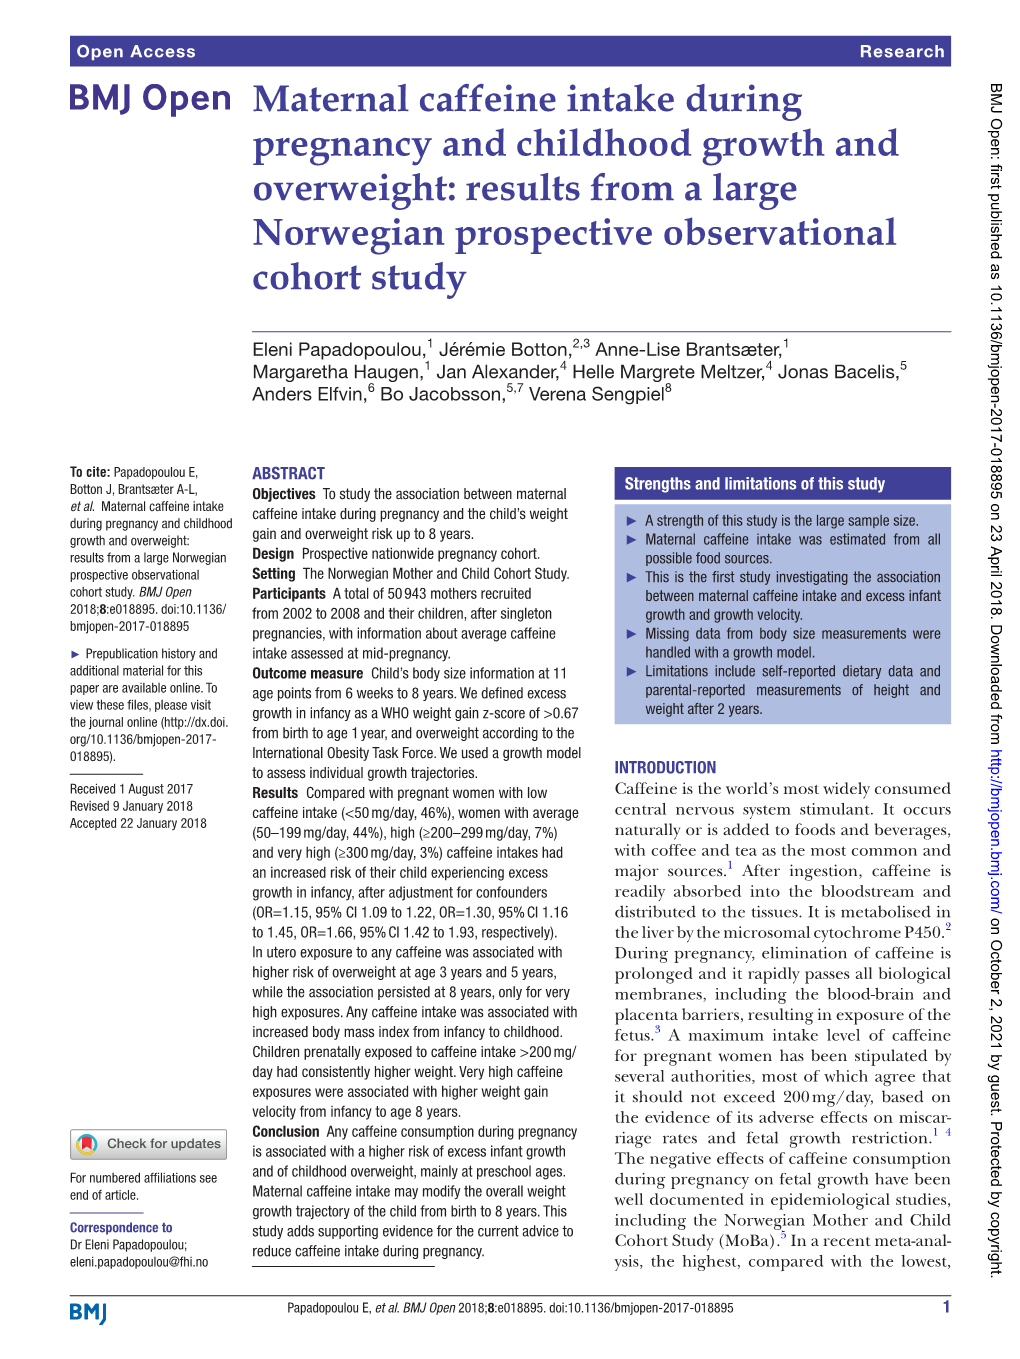 Maternal Caffeine Intake During Pregnancy and Childhood Growth and Overweight: Results from a Large Norwegian Prospective Observational Cohort Study